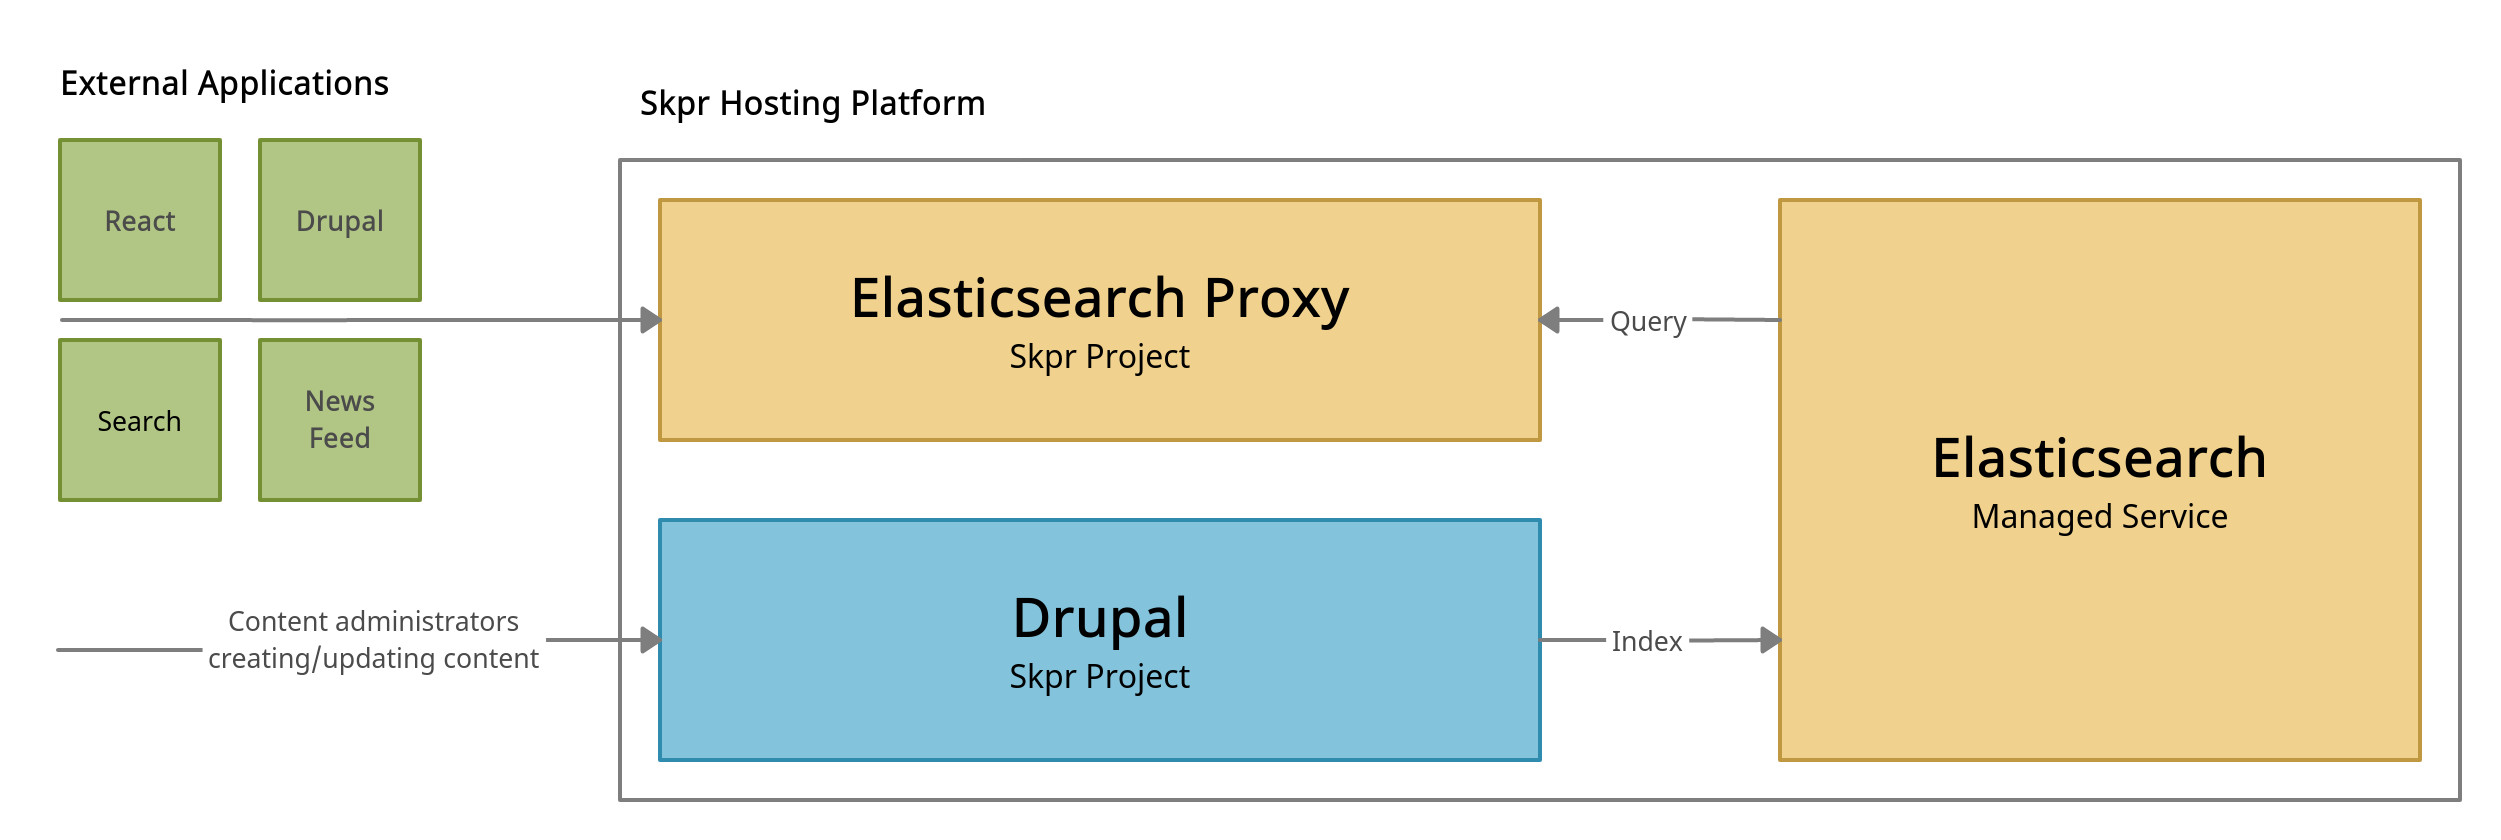 Diagram demonstrating an Elasticsearch architecture which could be used for a decoupled implementation